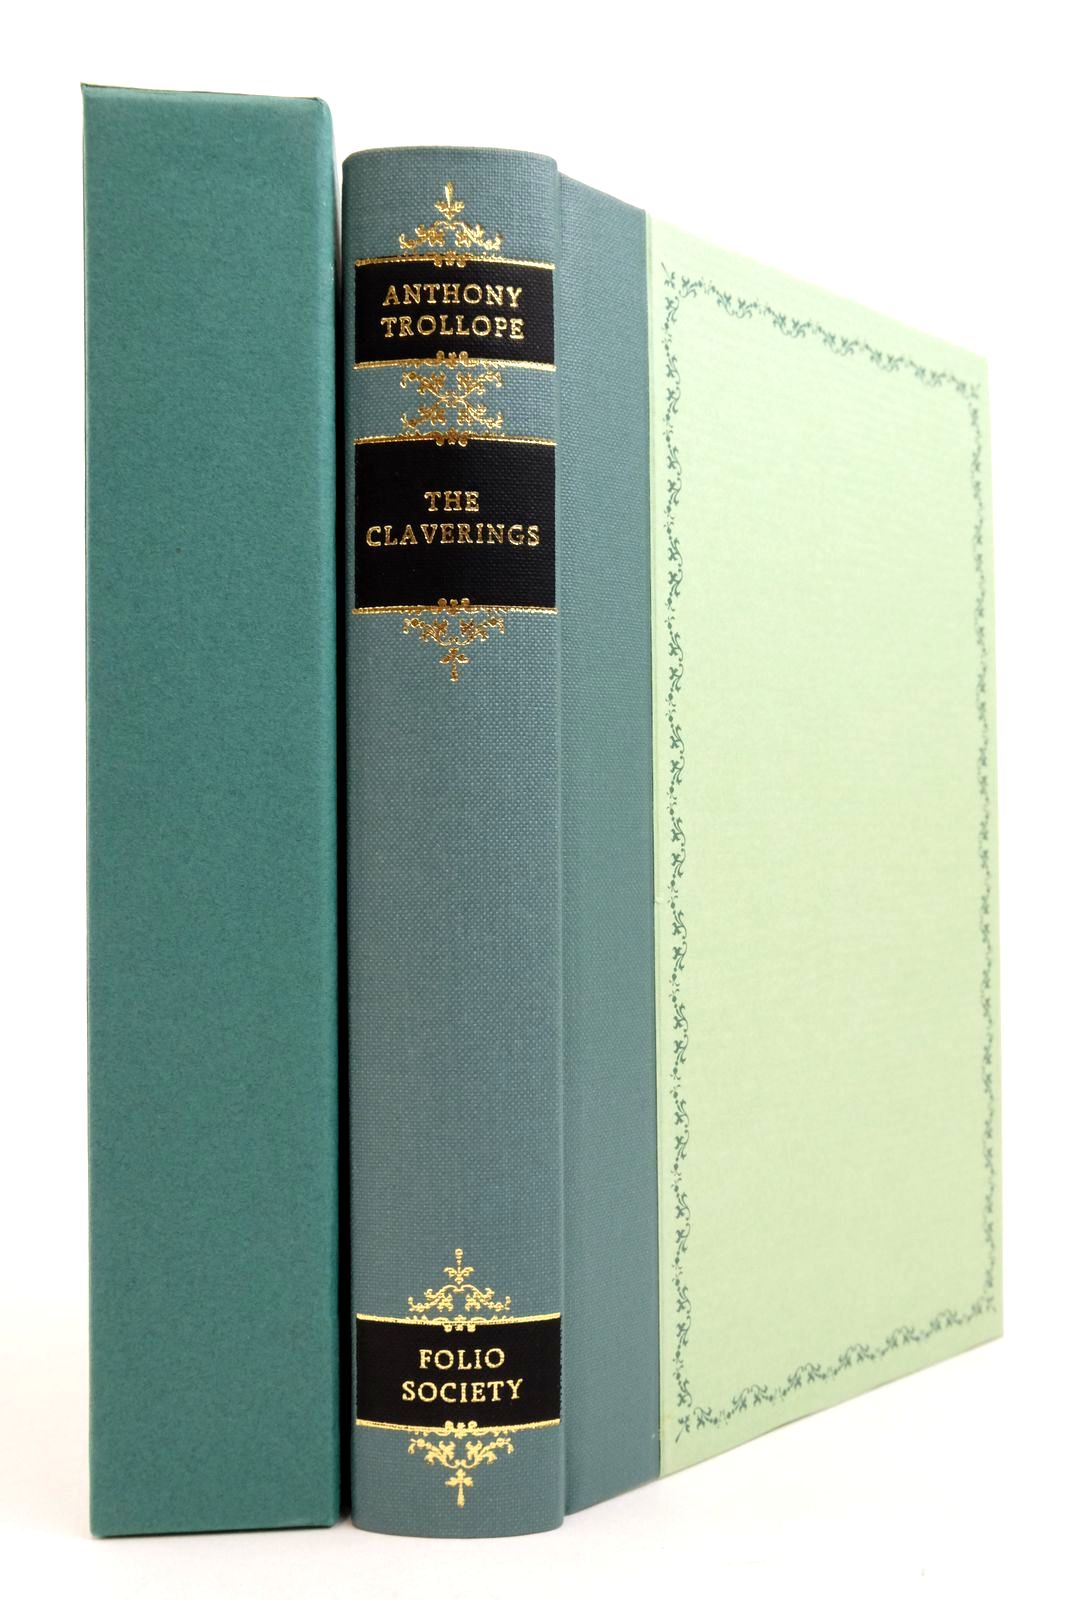 Photo of THE CLAVERINGS written by Trollope, Anthony
Egremont, Max illustrated by Pendle, Alexy published by Folio Society (STOCK CODE: 2138186)  for sale by Stella & Rose's Books